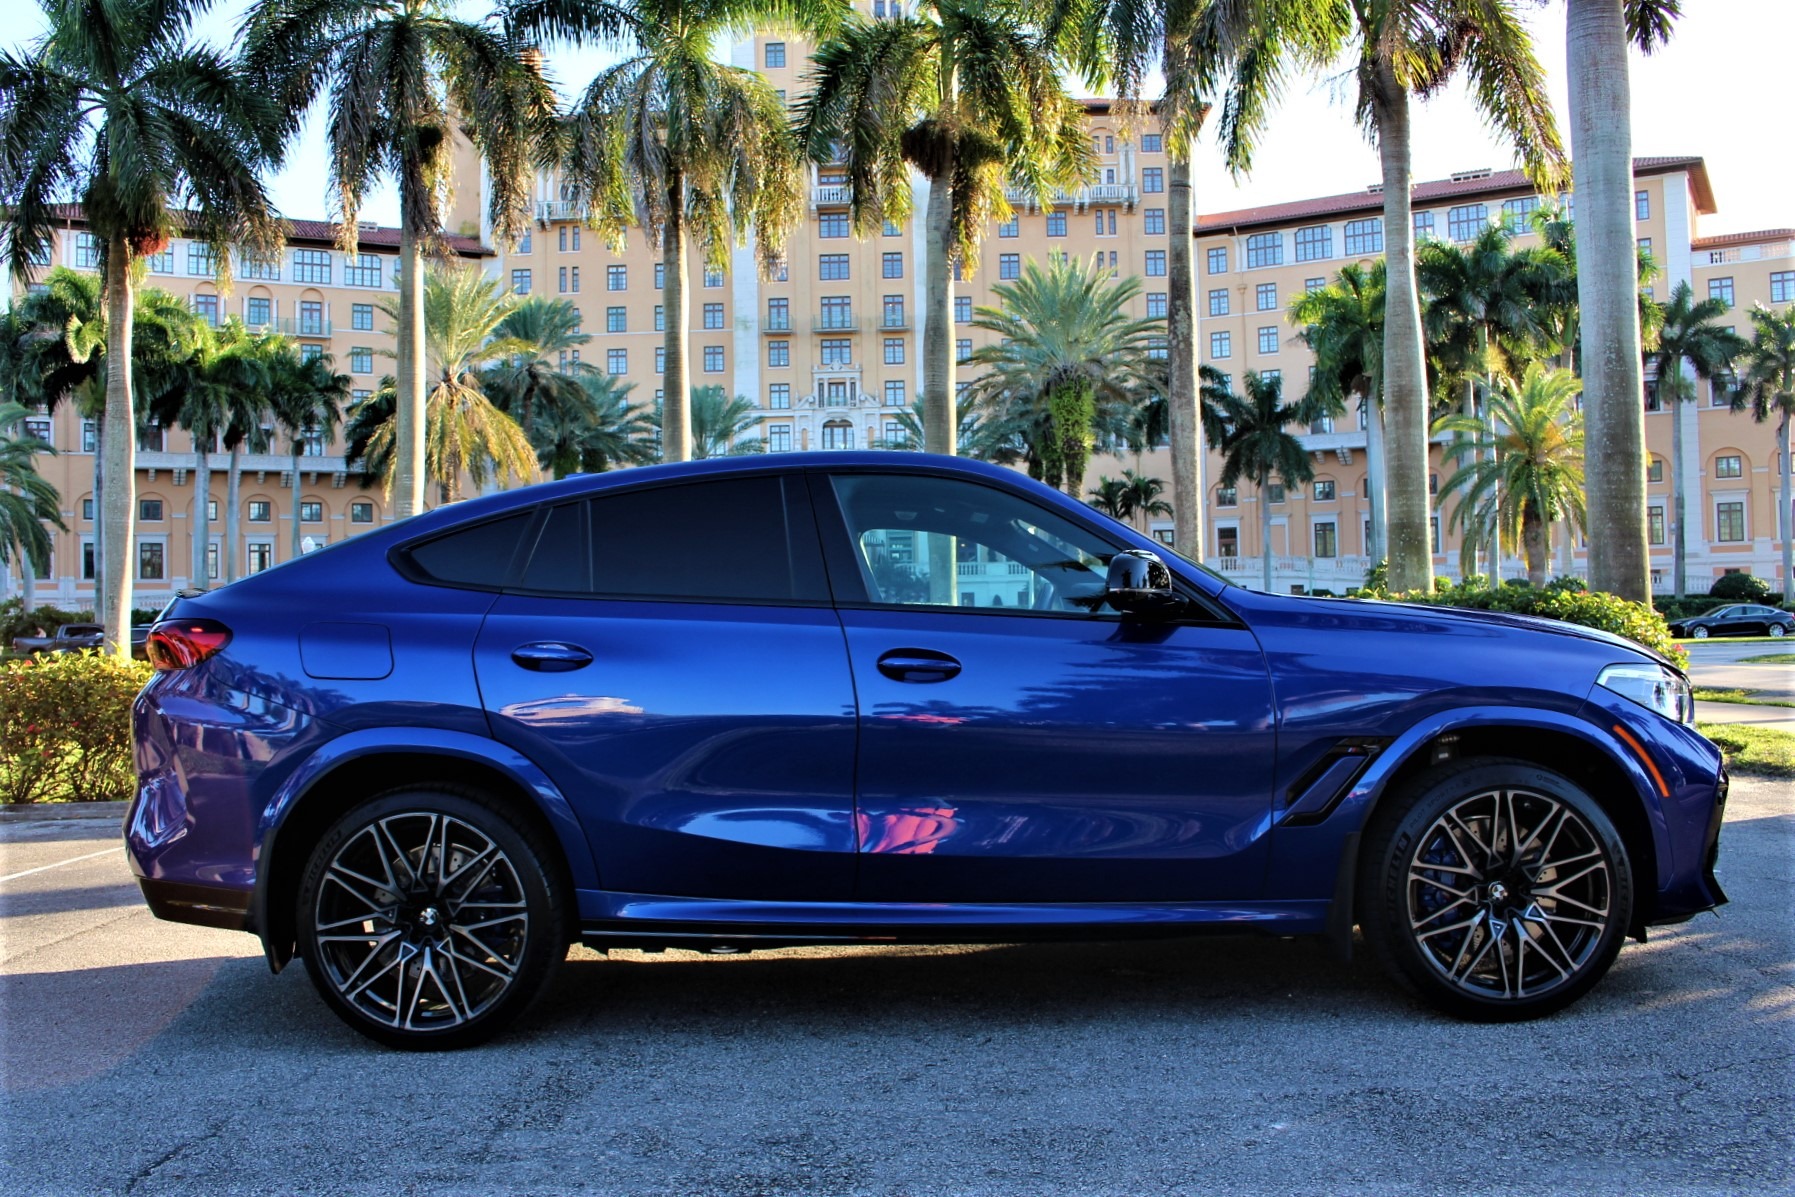 Used 2020 BMW X6 M Competition for sale $122,850 at The Gables Sports Cars in Miami FL 33146 2